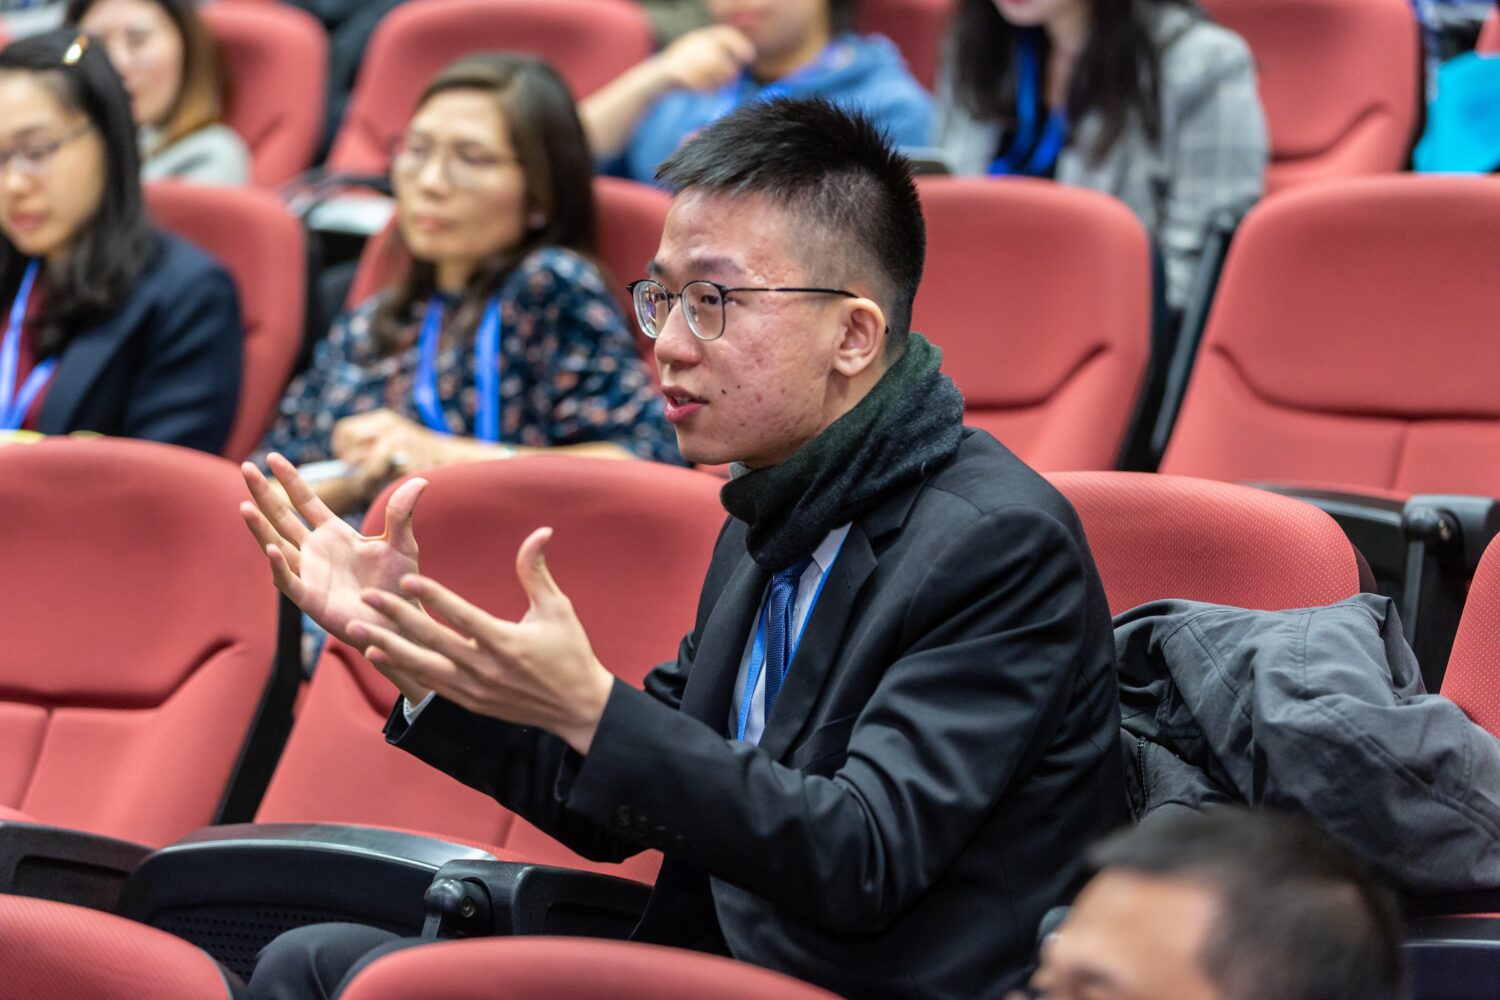 This is a rectangular image. This image appears to be from a presentation hall with some people sitting in the chairs. There is one male person of Asian origin sitting in the audience chair and appears to be taking some hand gestures, other people appear to be listening.